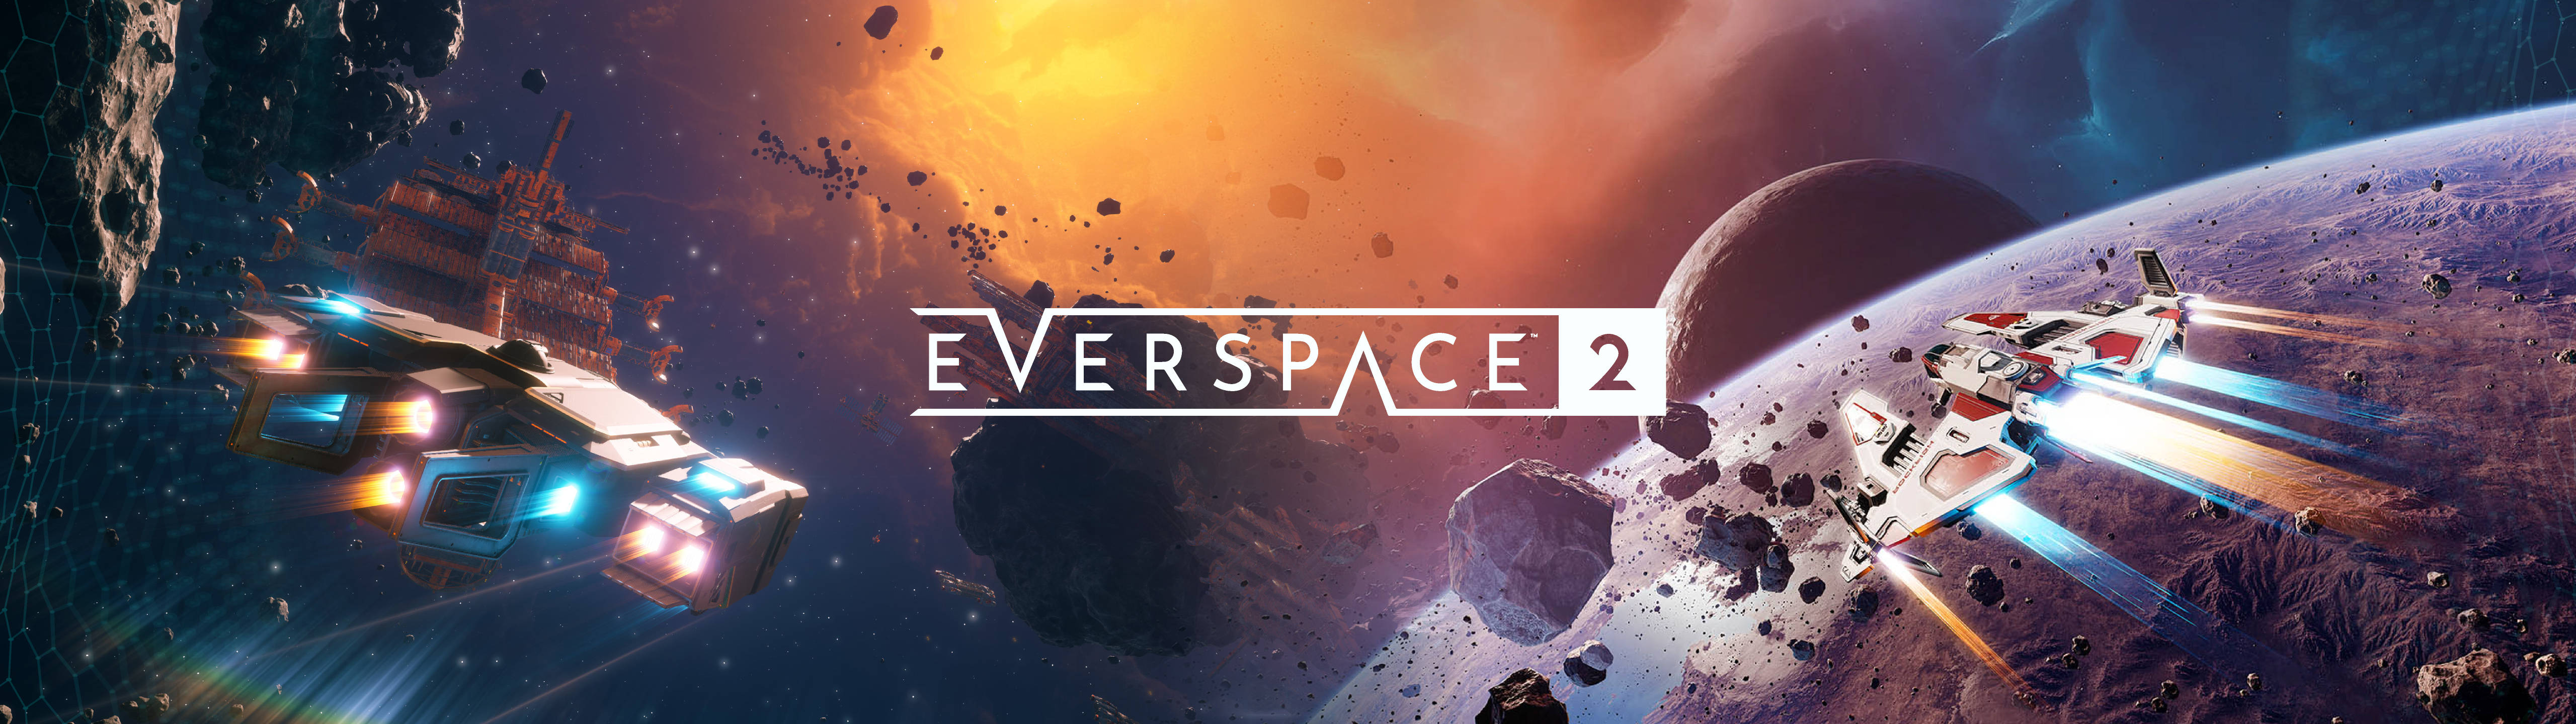 Everspace 2 5120x1440 Gaming Landscape Wallpaper